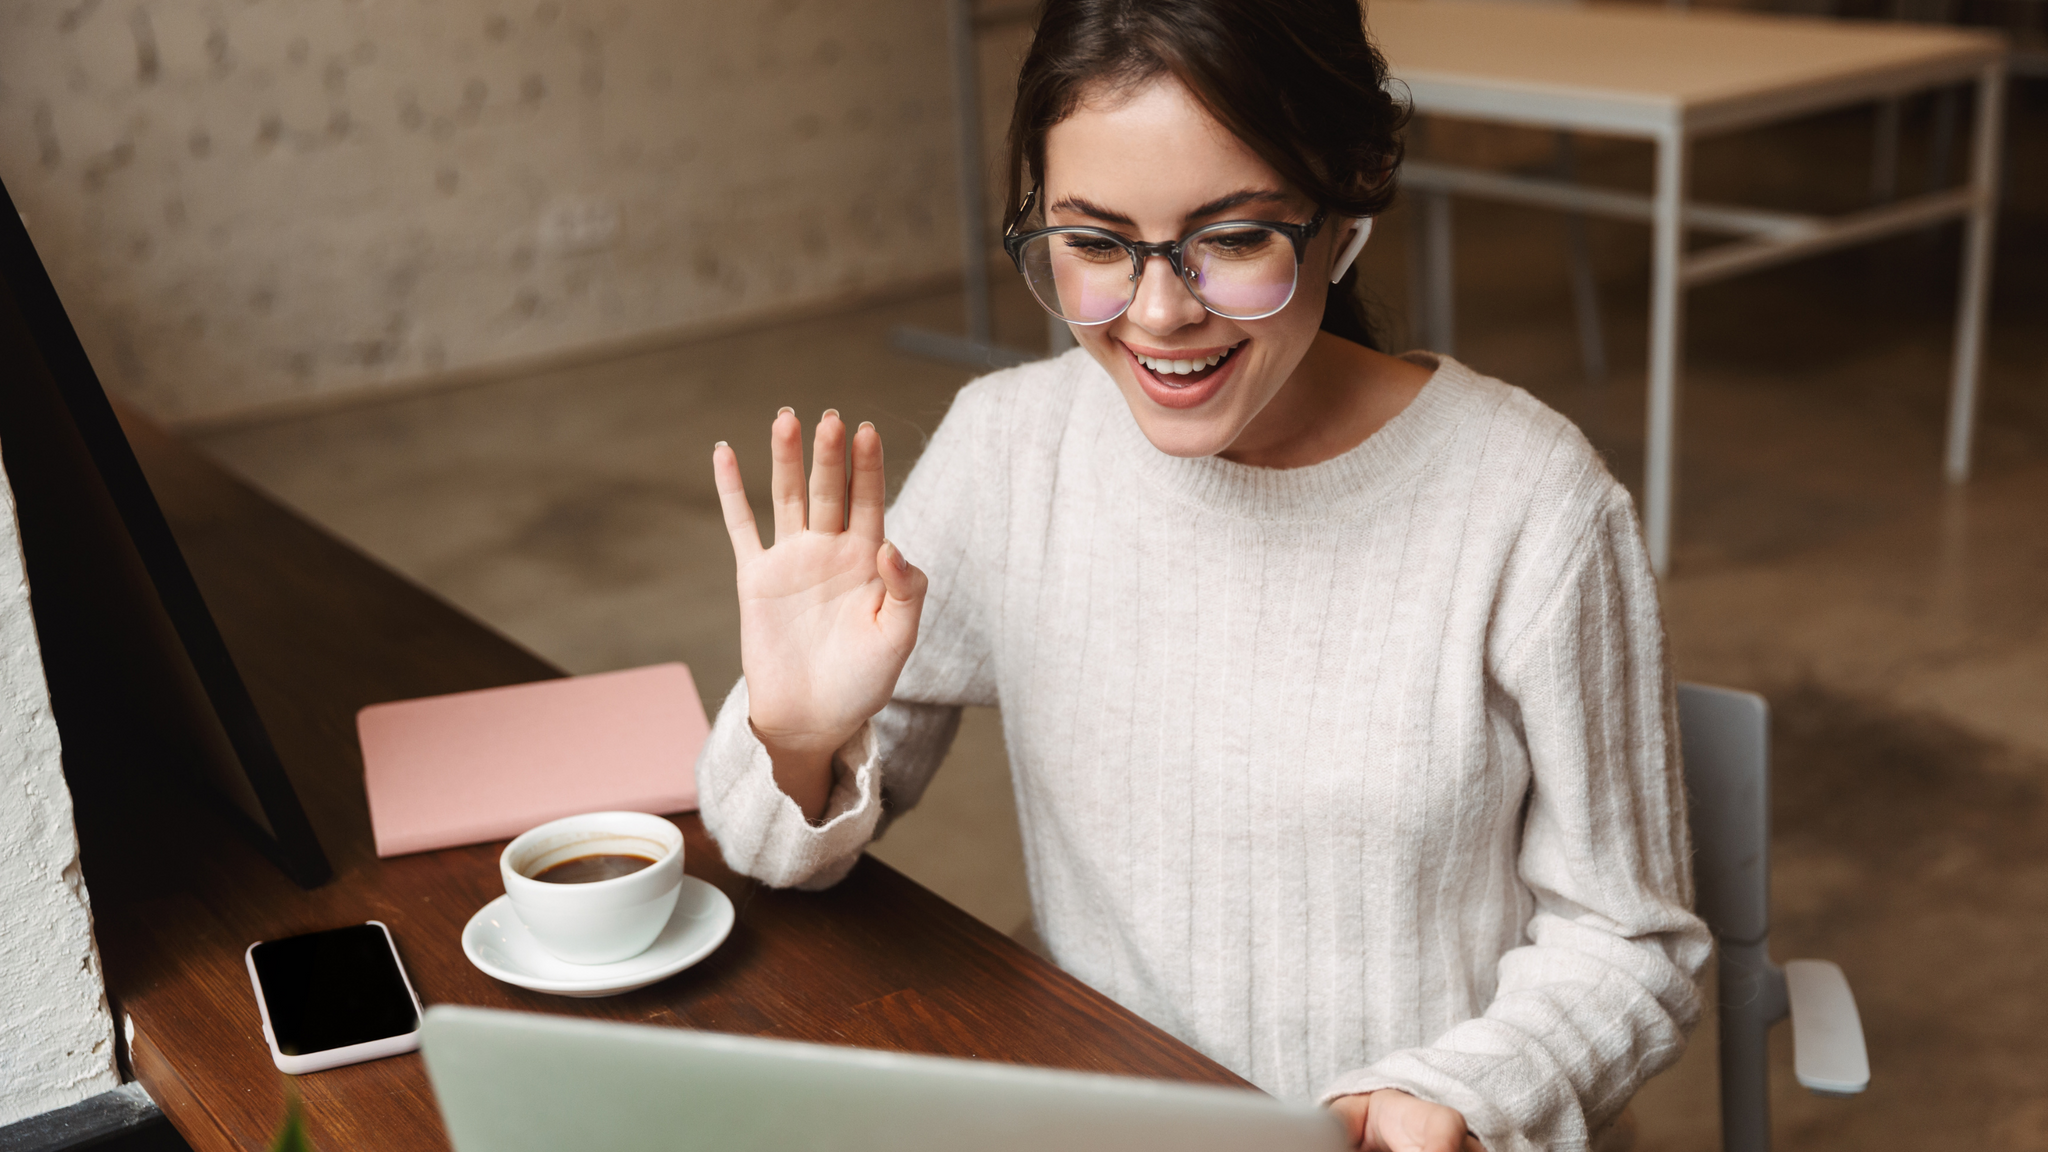 Woman with glasses waving at a computer screen as if saying hi on a video call